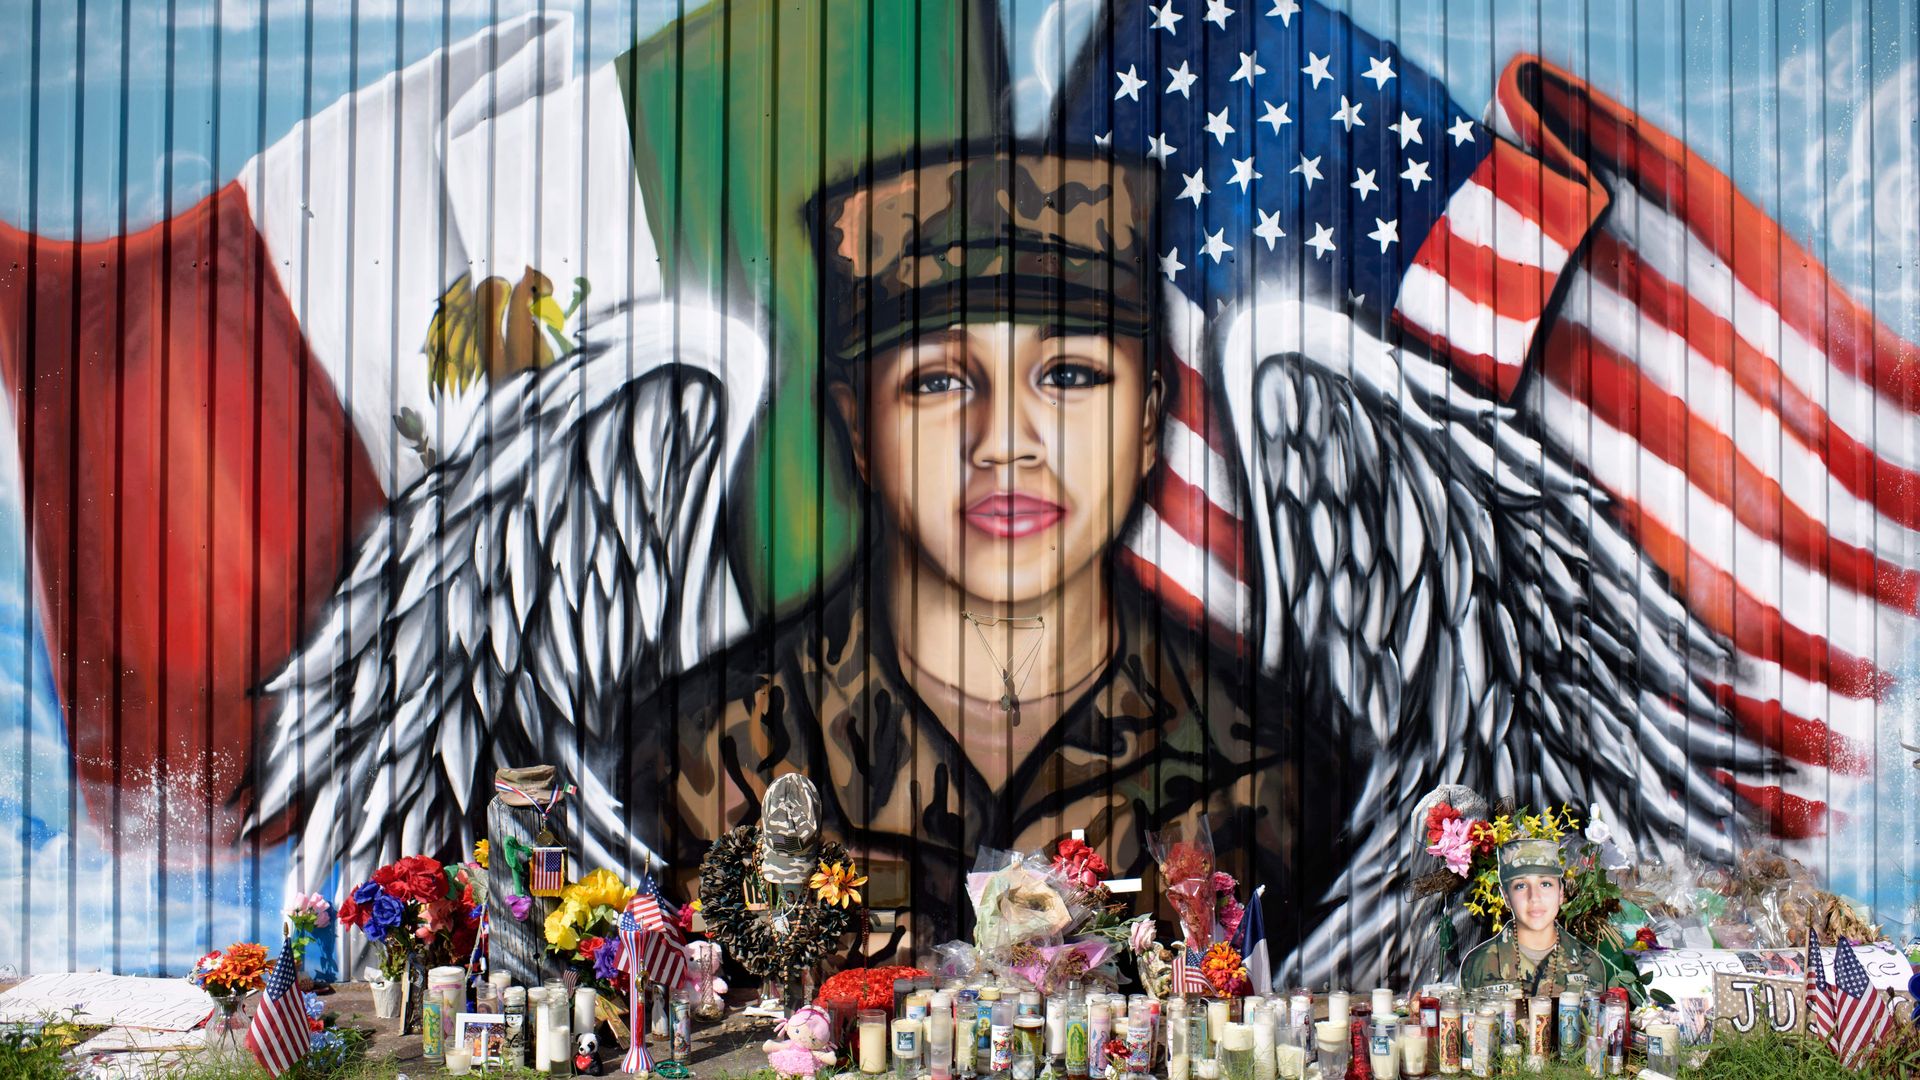 Candles and flowers decorate a makeshift memorial for US Army Specialist Vanessa Guillen 